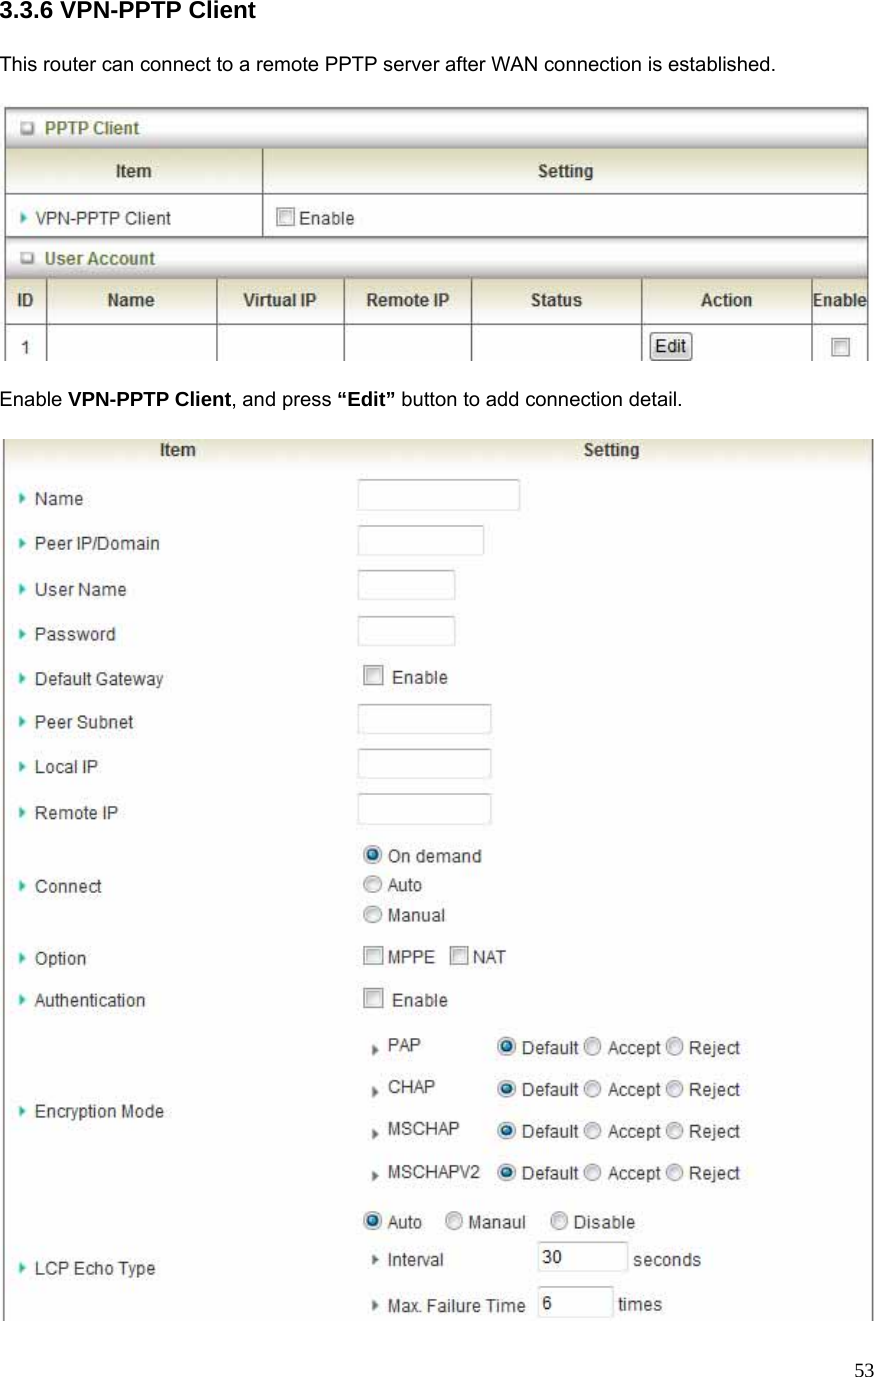  533.3.6 VPN-PPTP Client  This router can connect to a remote PPTP server after WAN connection is established.    Enable VPN-PPTP Client, and press “Edit” button to add connection detail.   